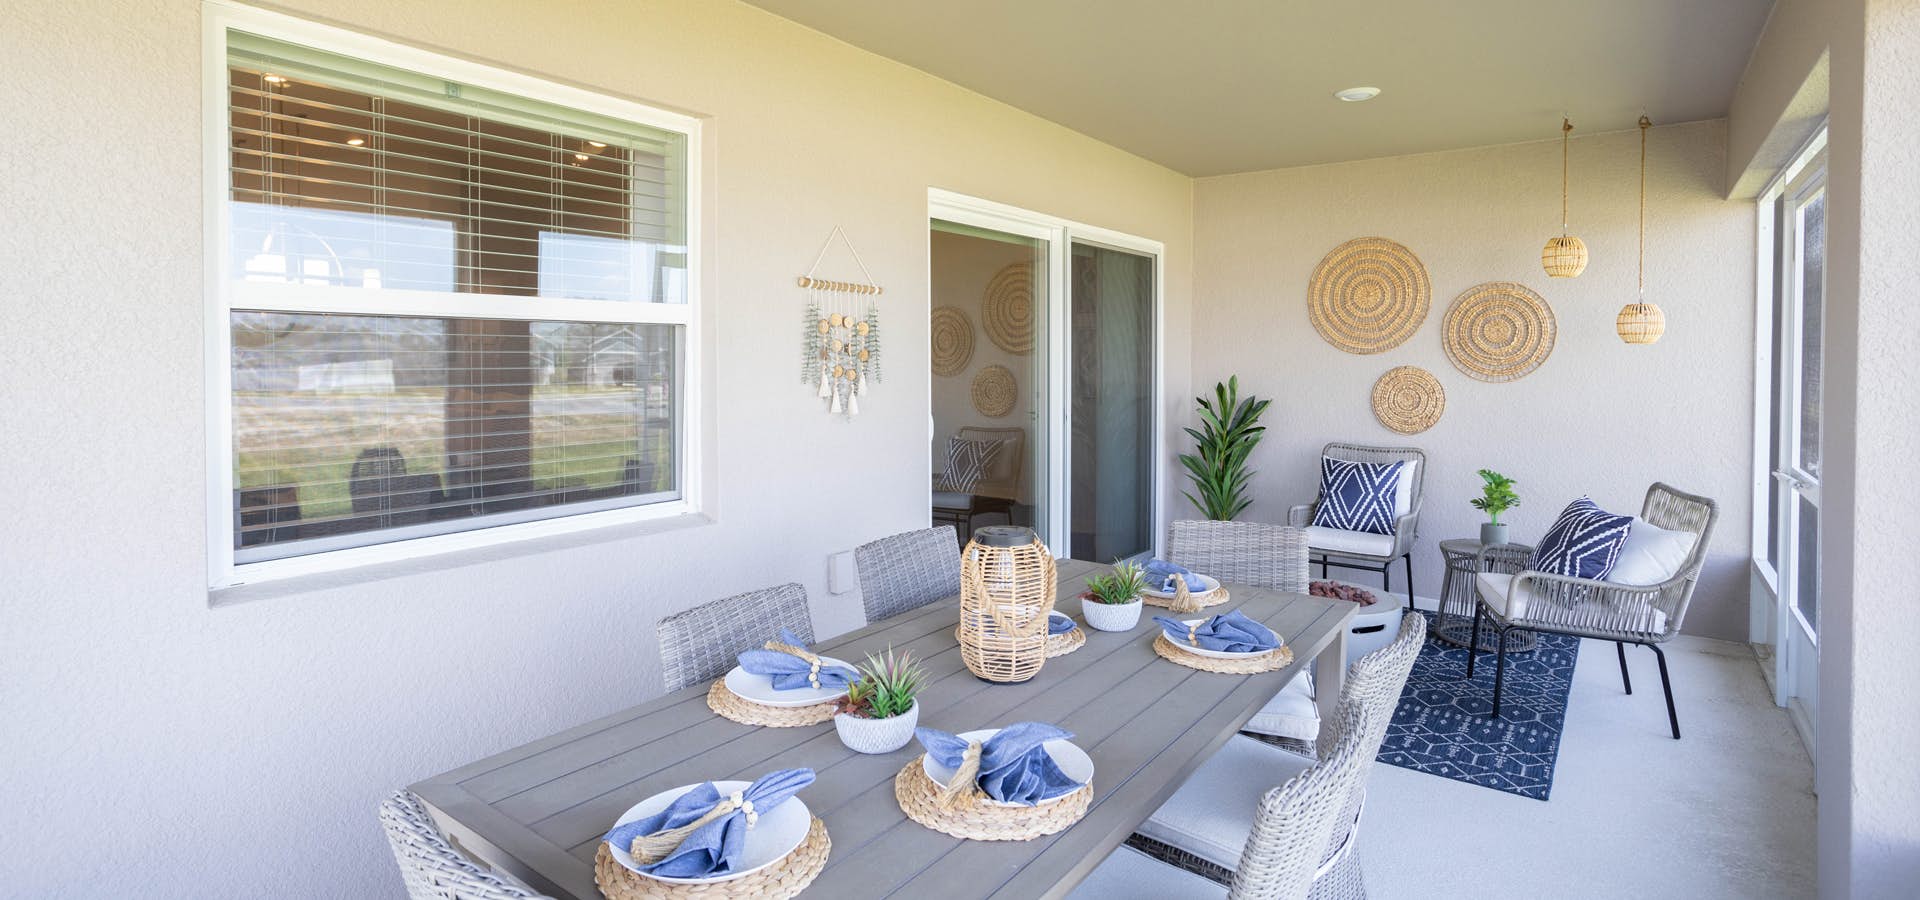 Spacious covered lanai area with large table and lounge chairs